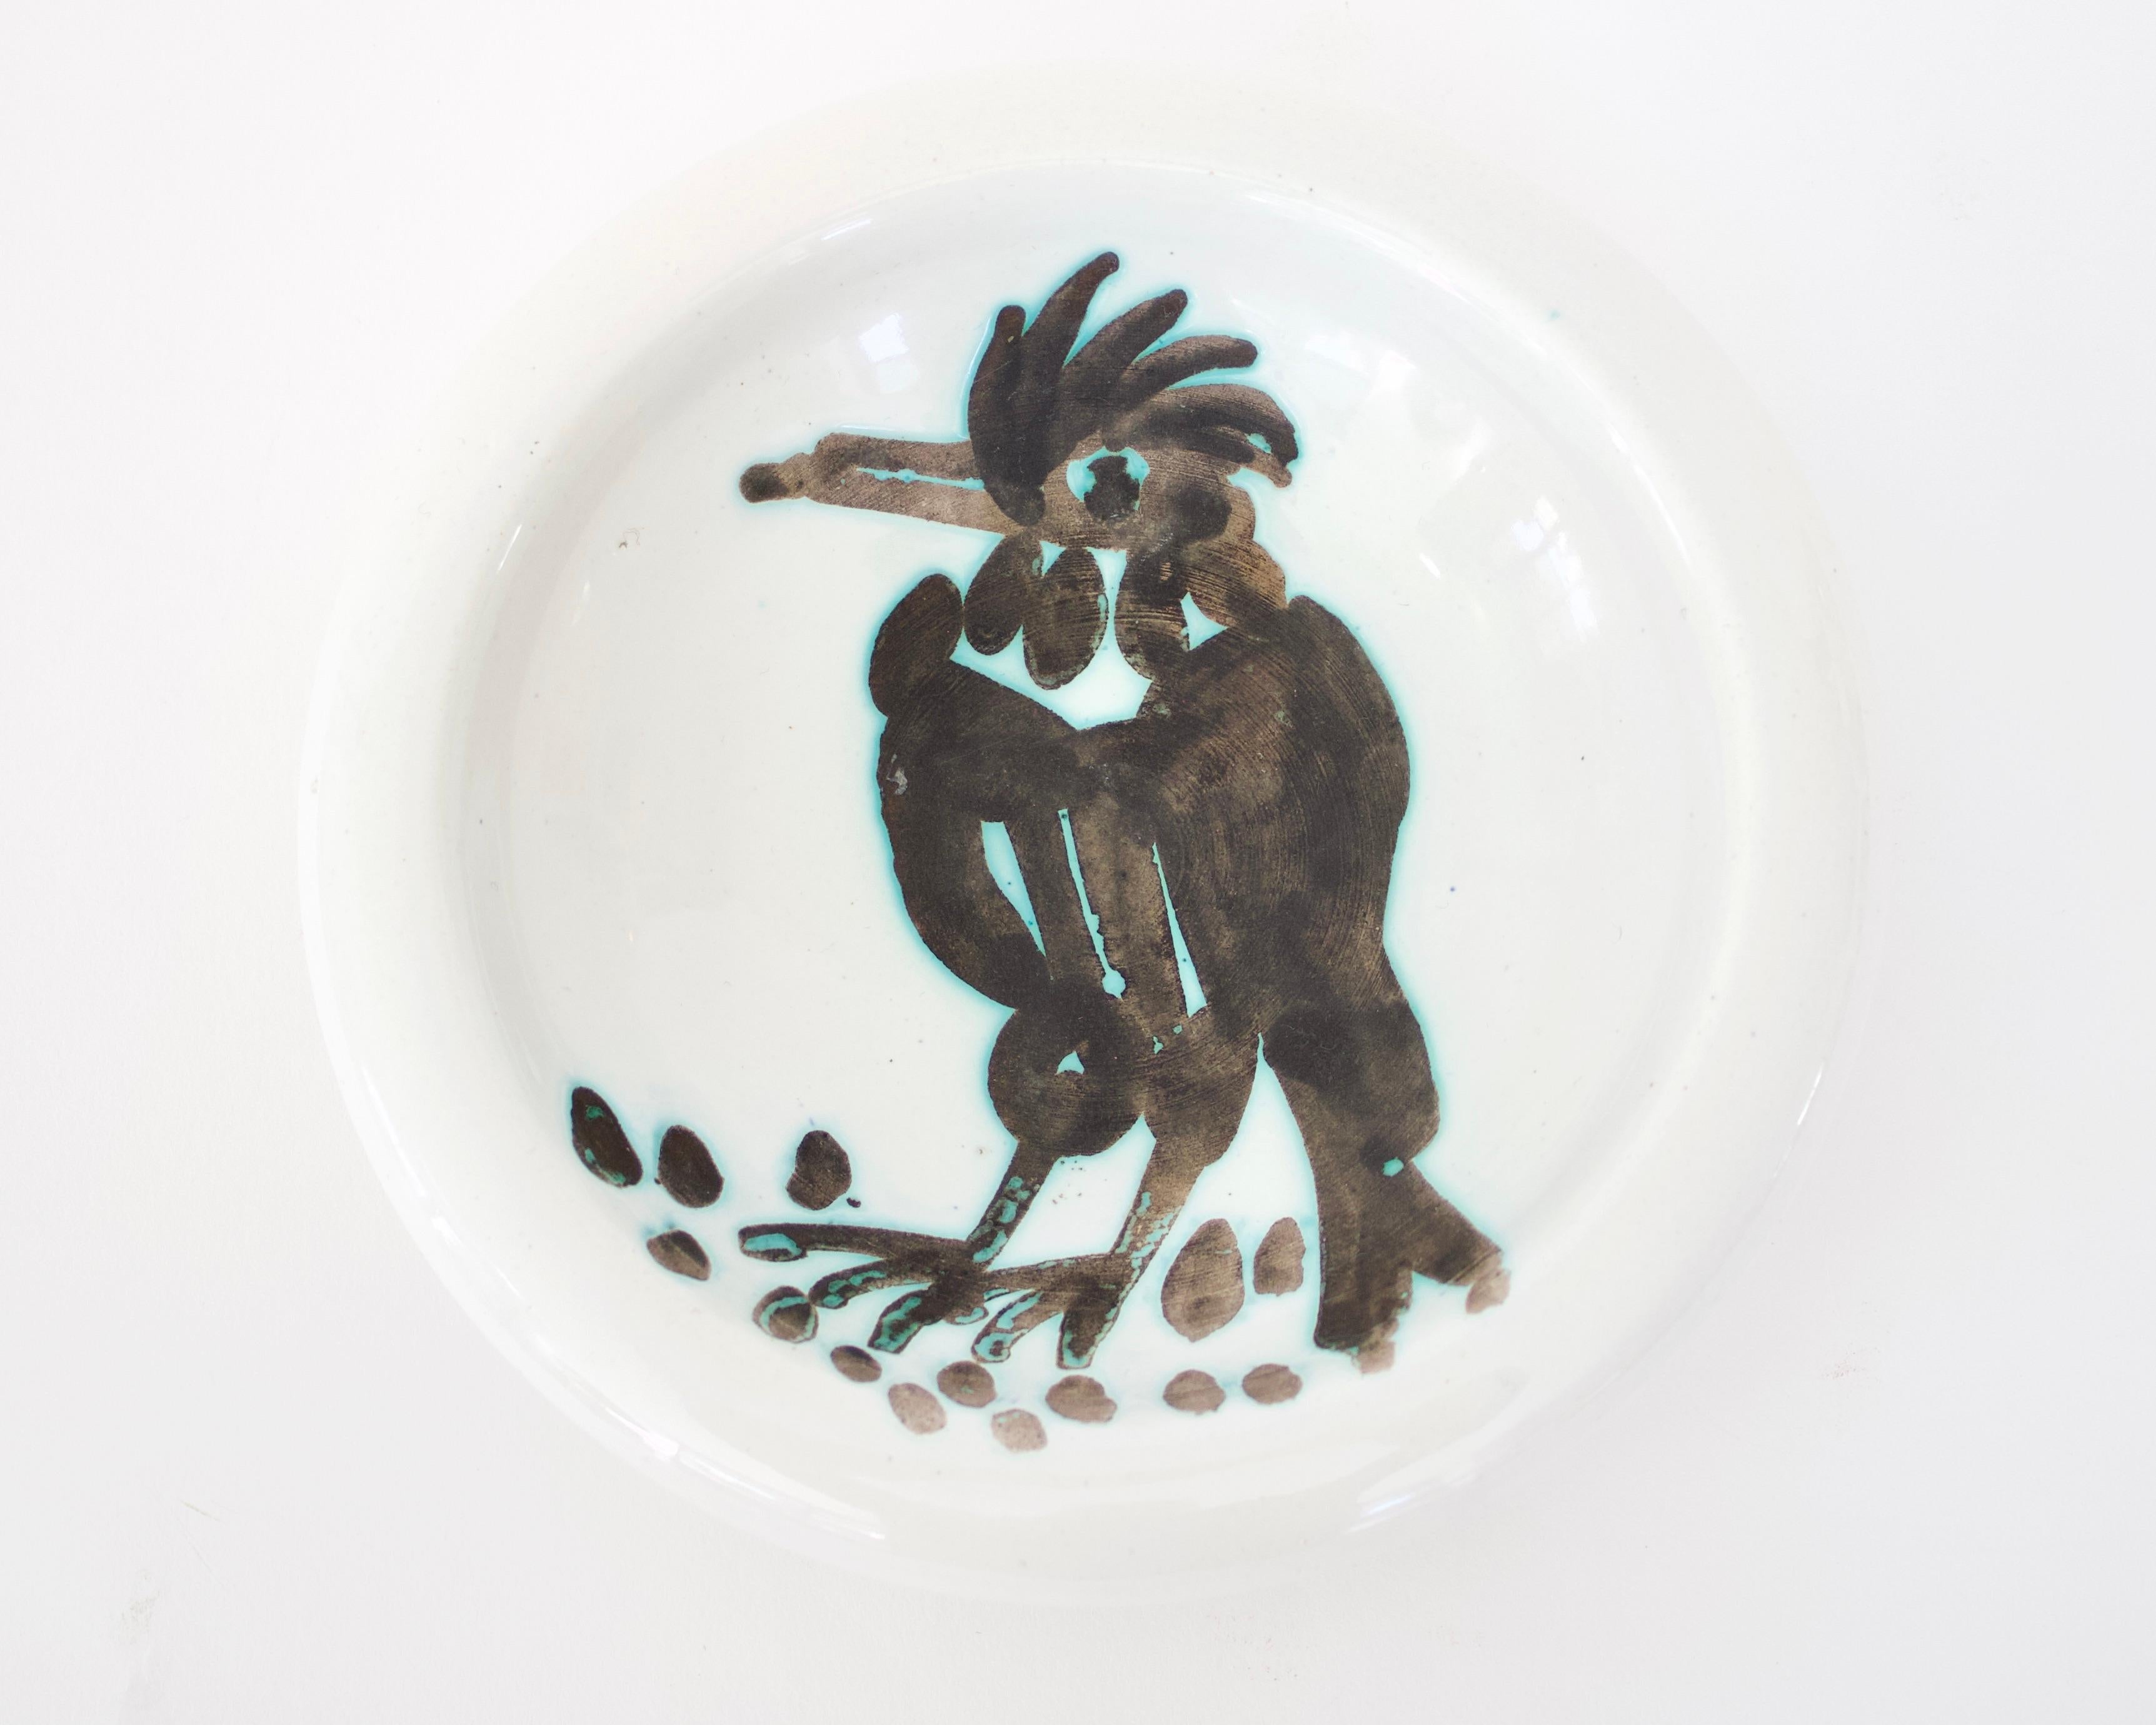 Pablo Picasso Oiseau dish bird with tuft, editions Picasso Madoura France. circa 1952. 14 had painted brush strokes under the birds feet referring to food. 
Impressed with mark to underside Madoura Plein Feu edition Picasso and also with edition